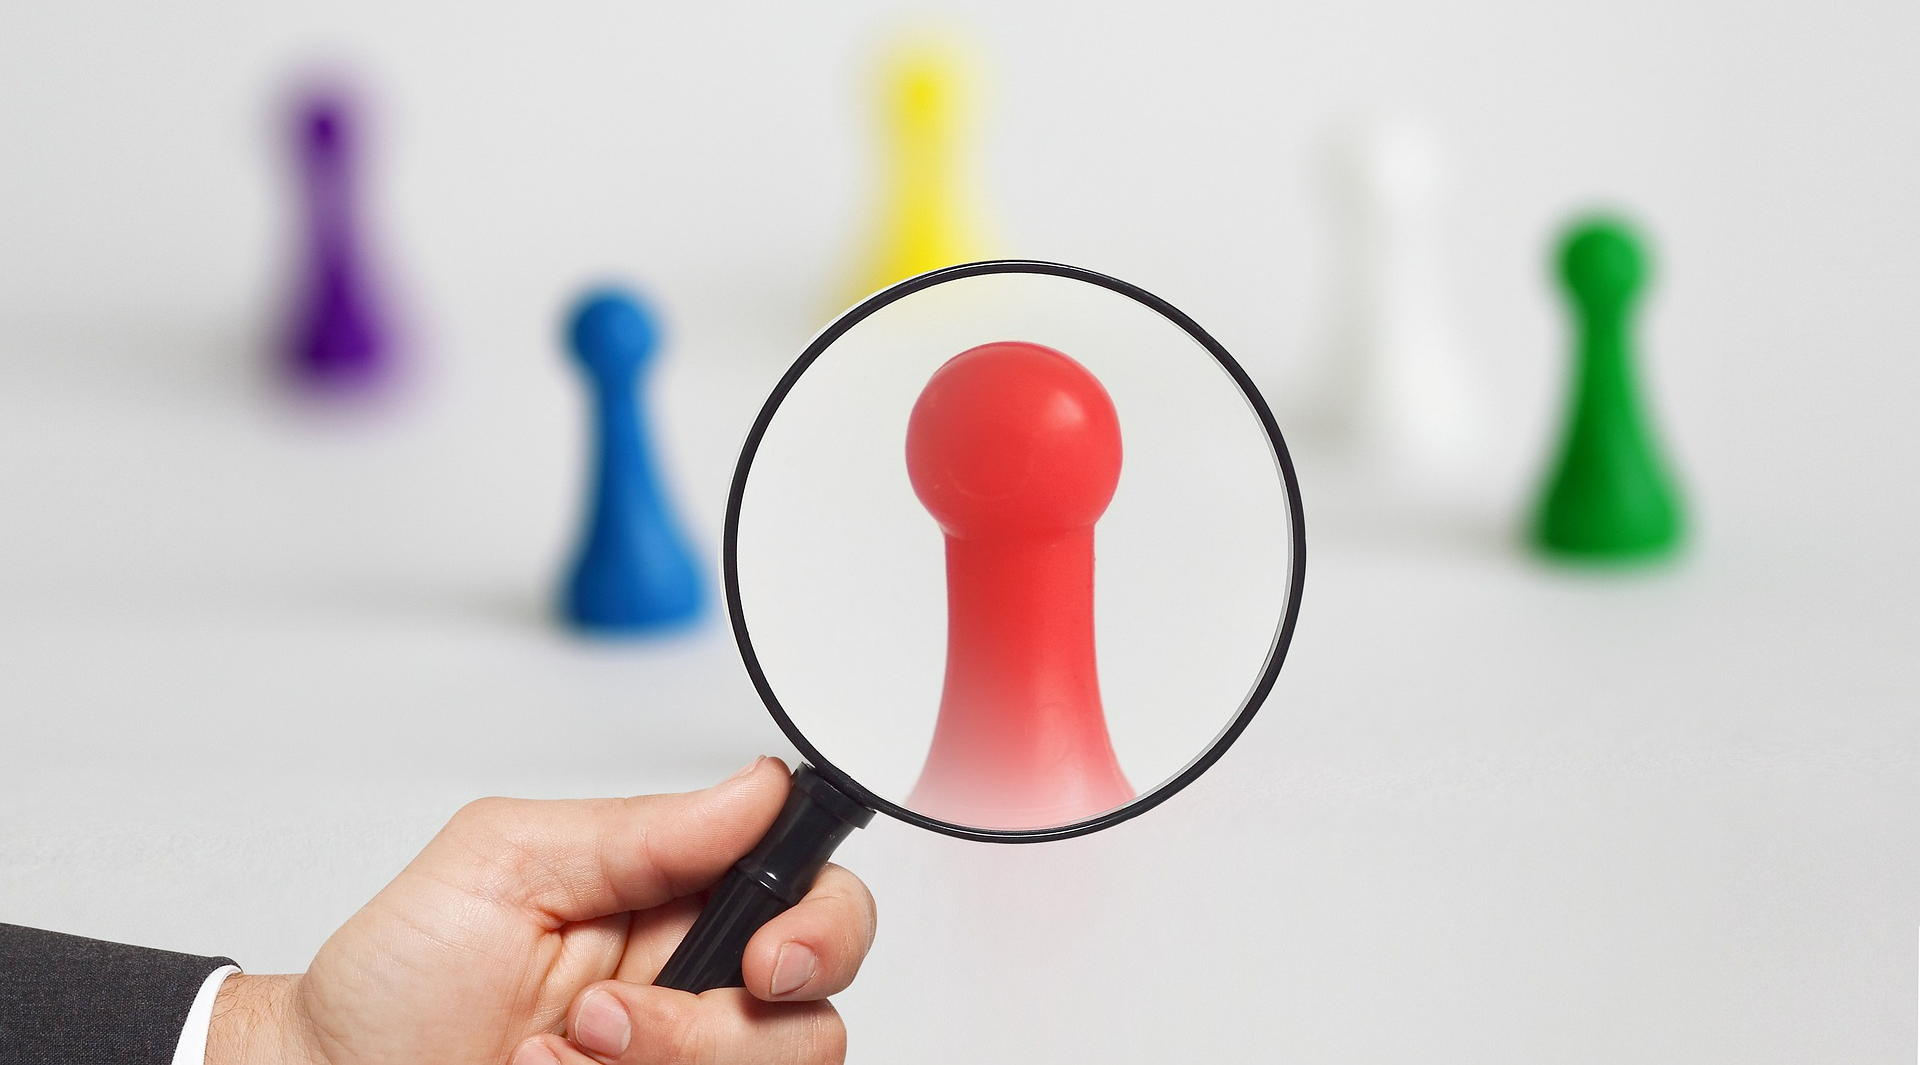 With new technologies and methods appearing each day, it's important to remember the basics of customer segmentation.